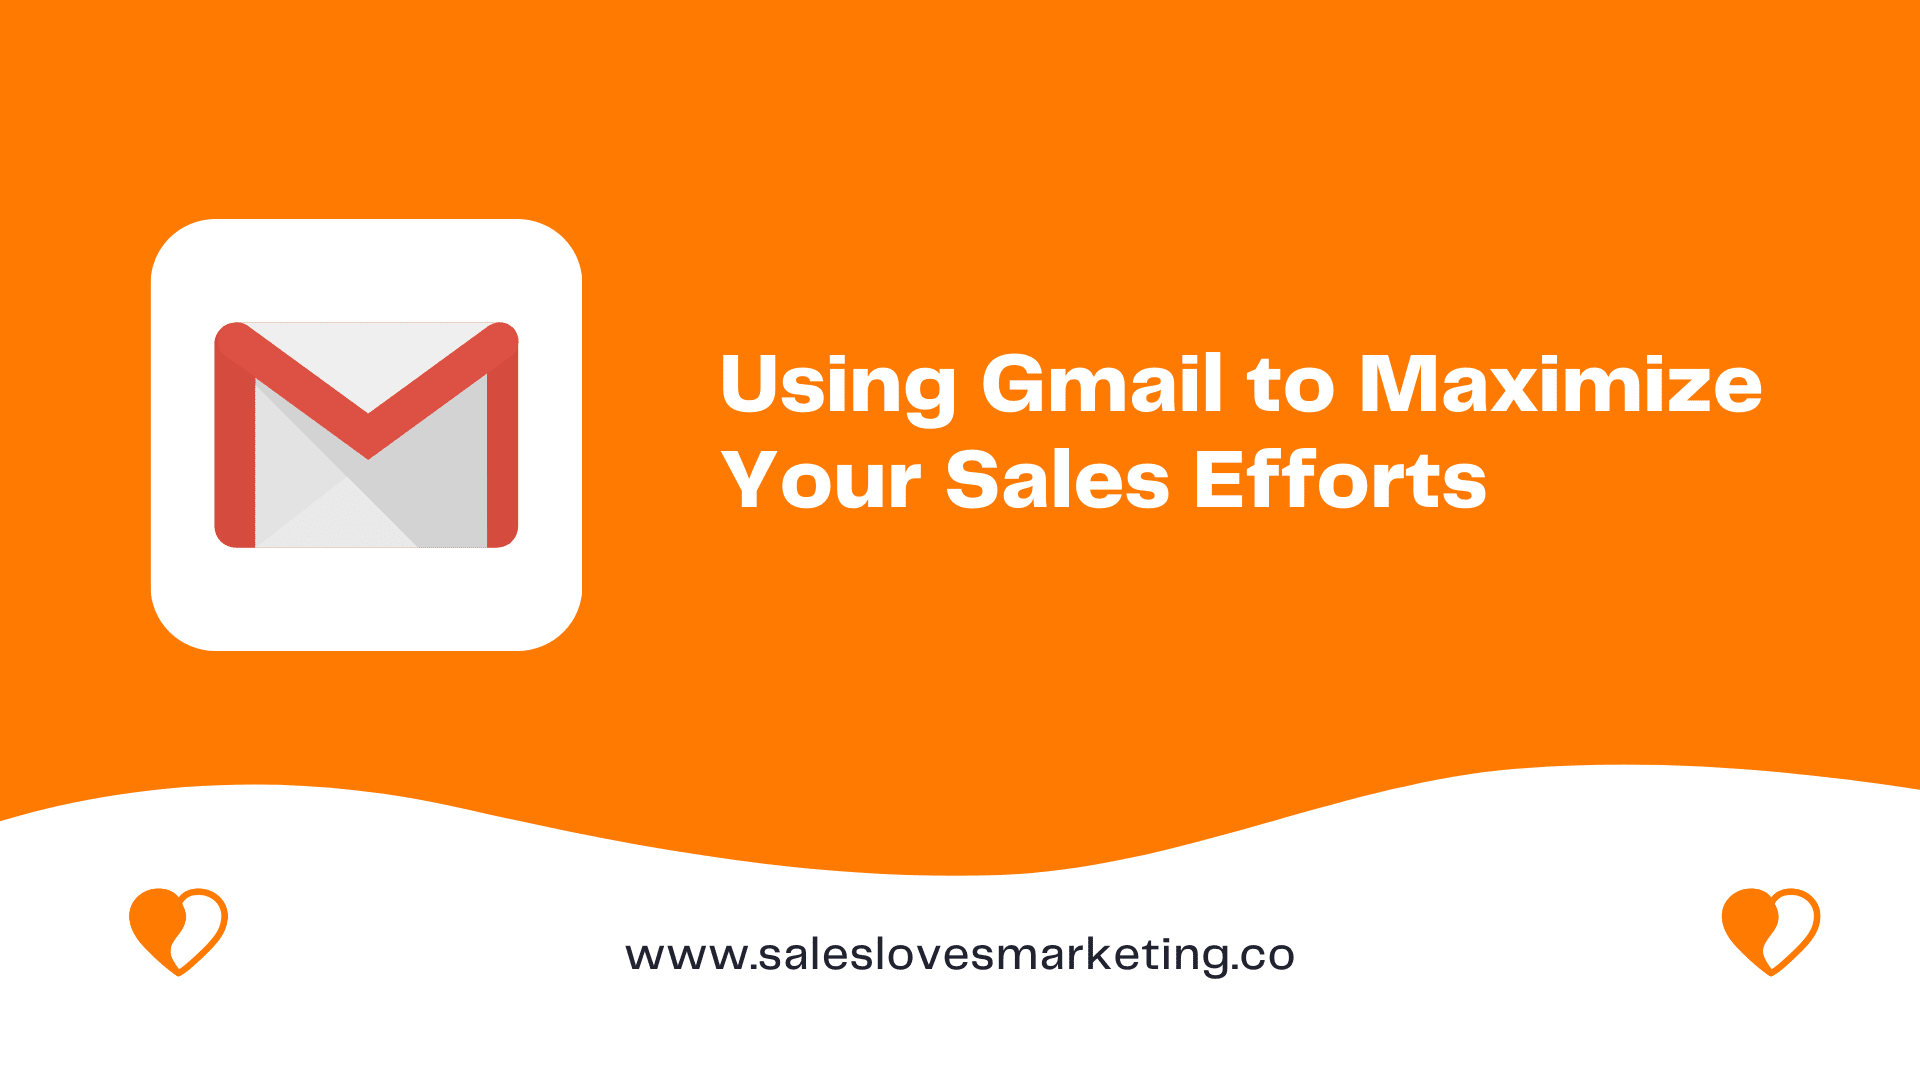 Using Gmail to Maximize Your Sales Efforts